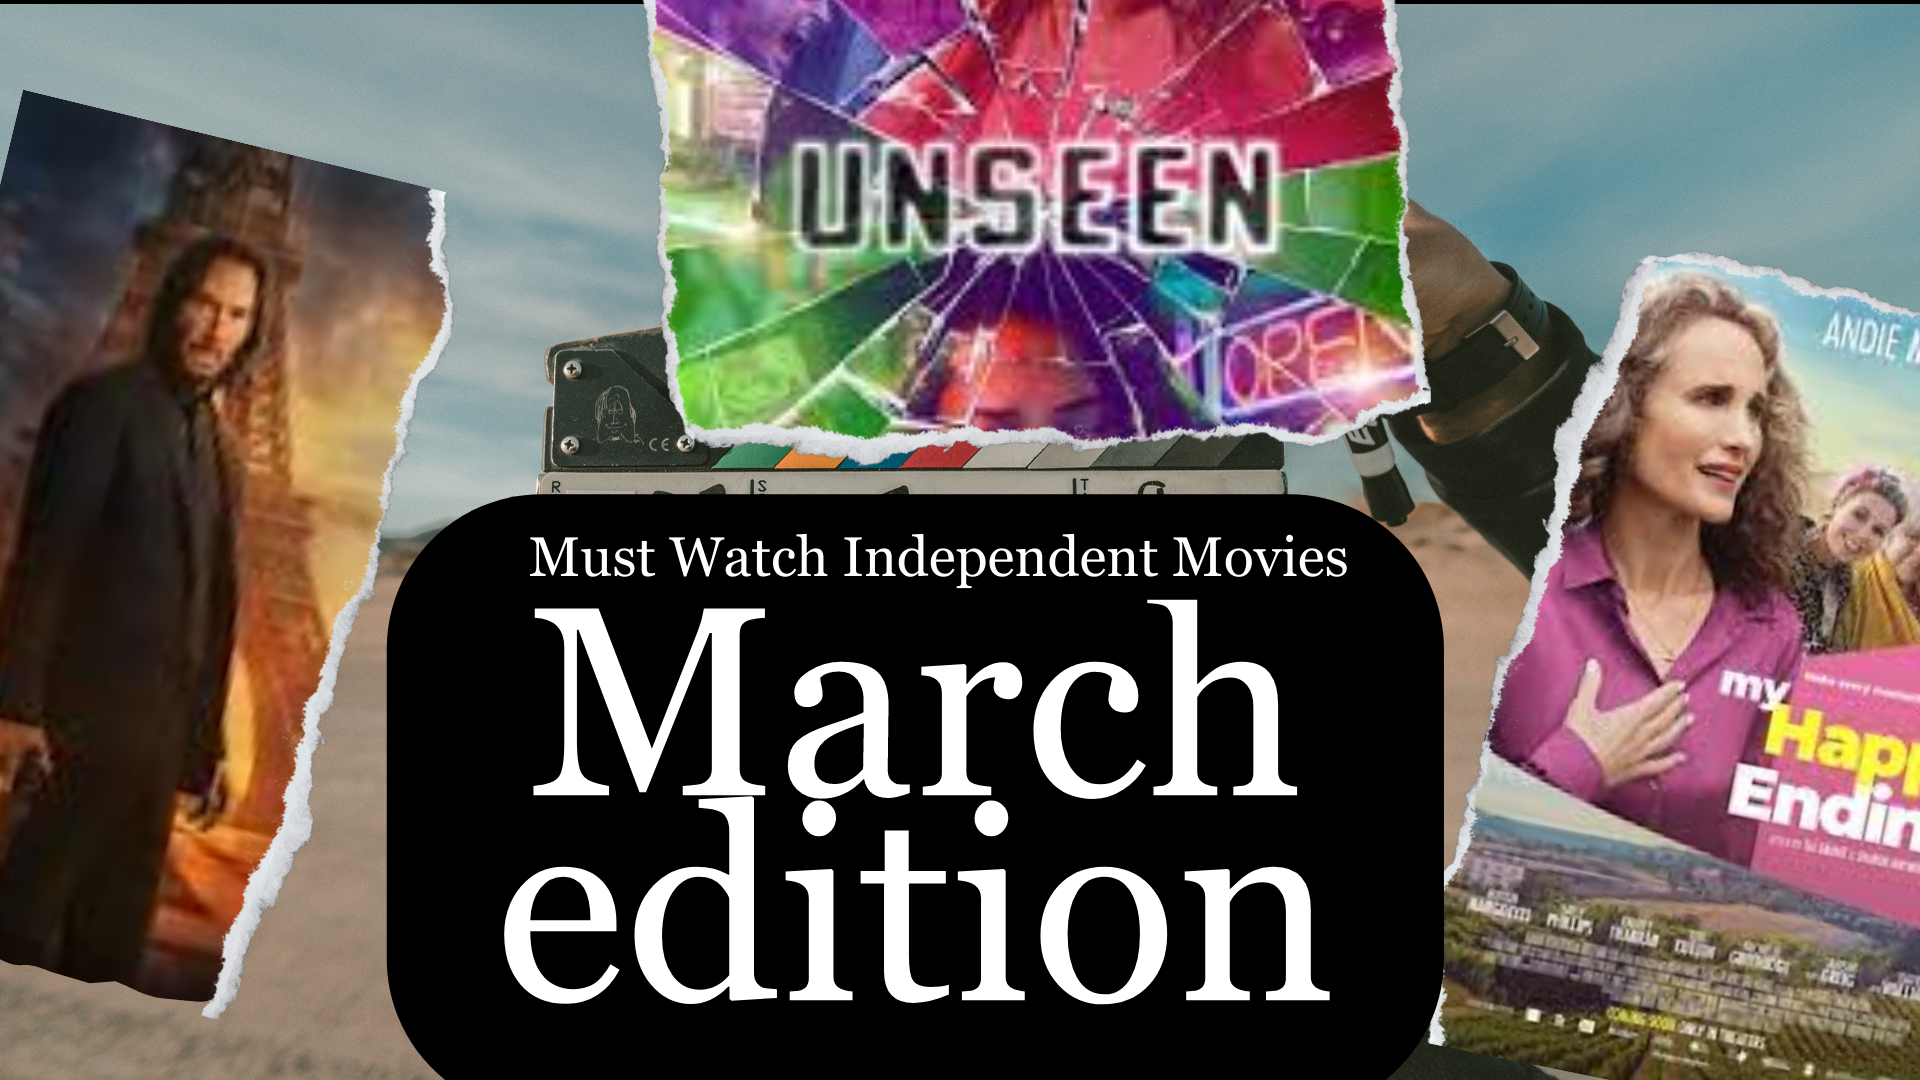 Must Watch Independent Movies: March Edition